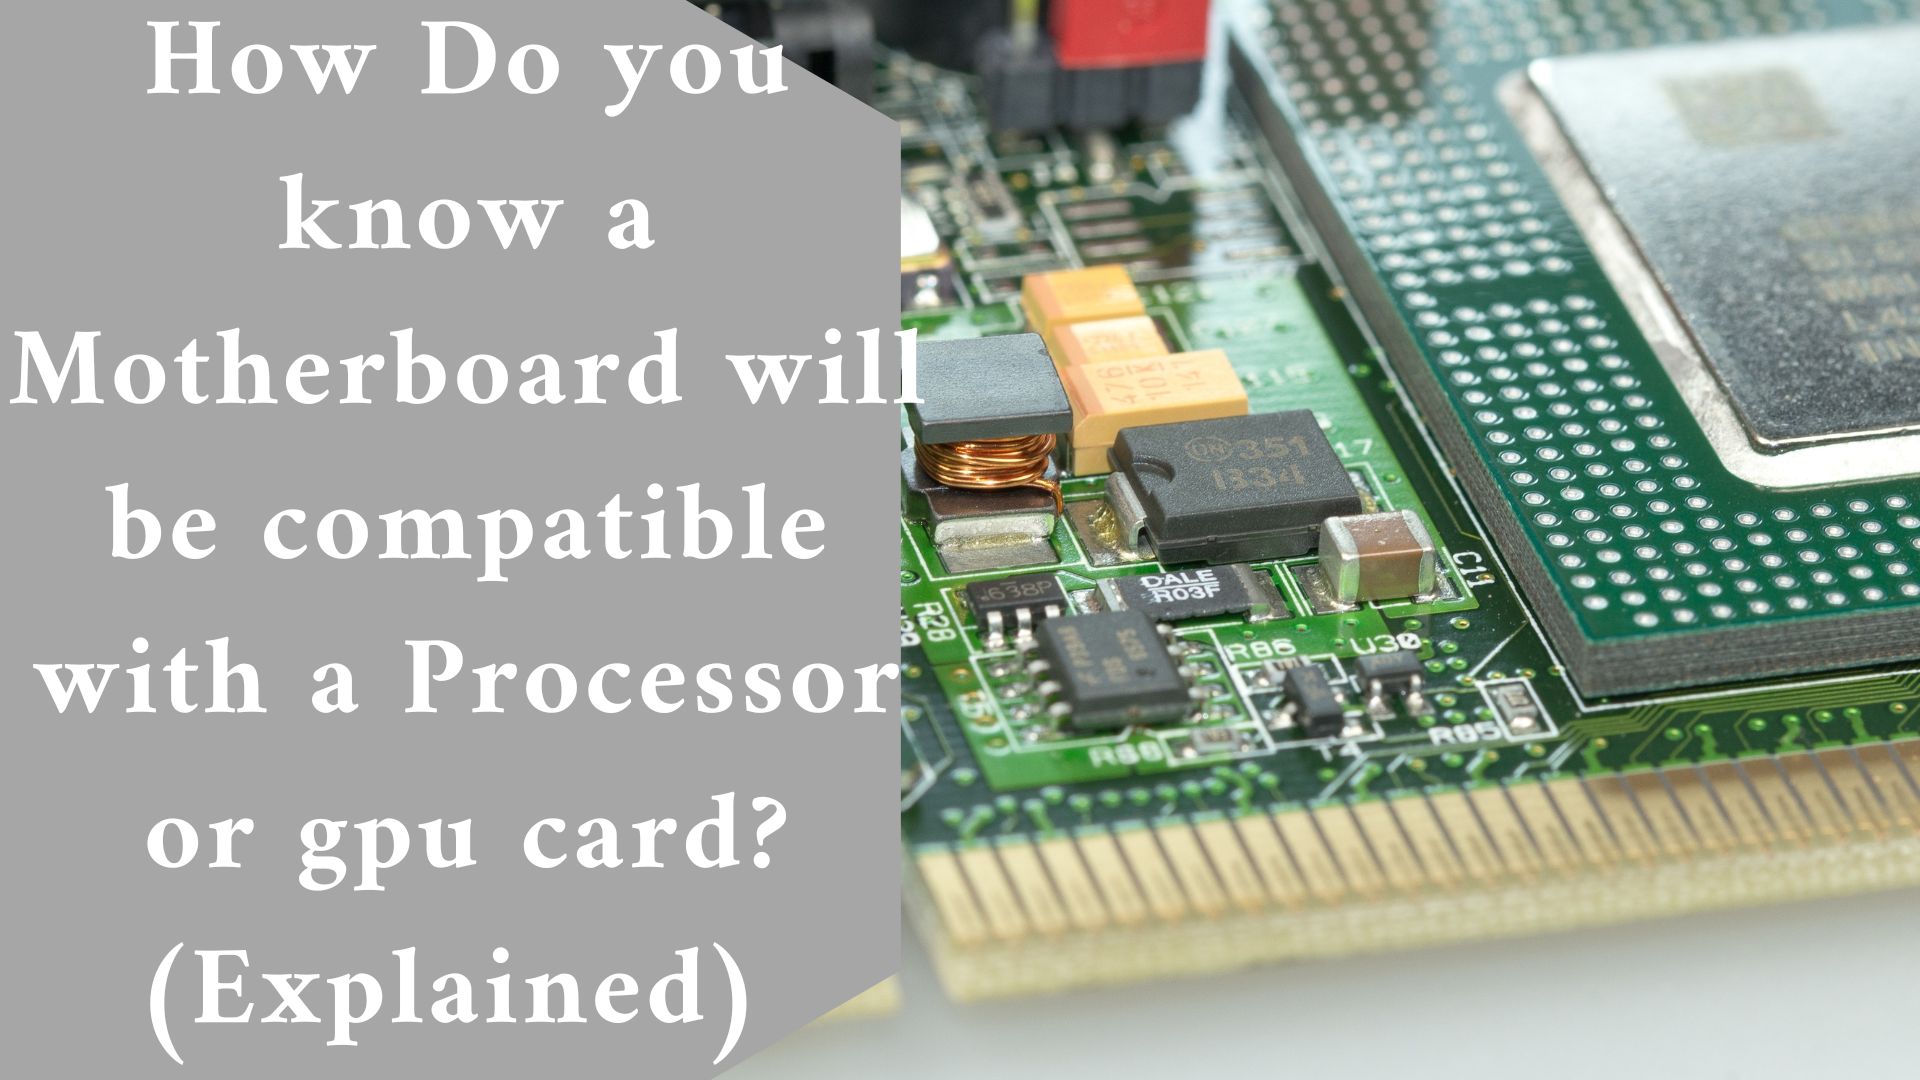 How Do you know a Motherboard will be compatible with a Processor or gpu card? (Explained)